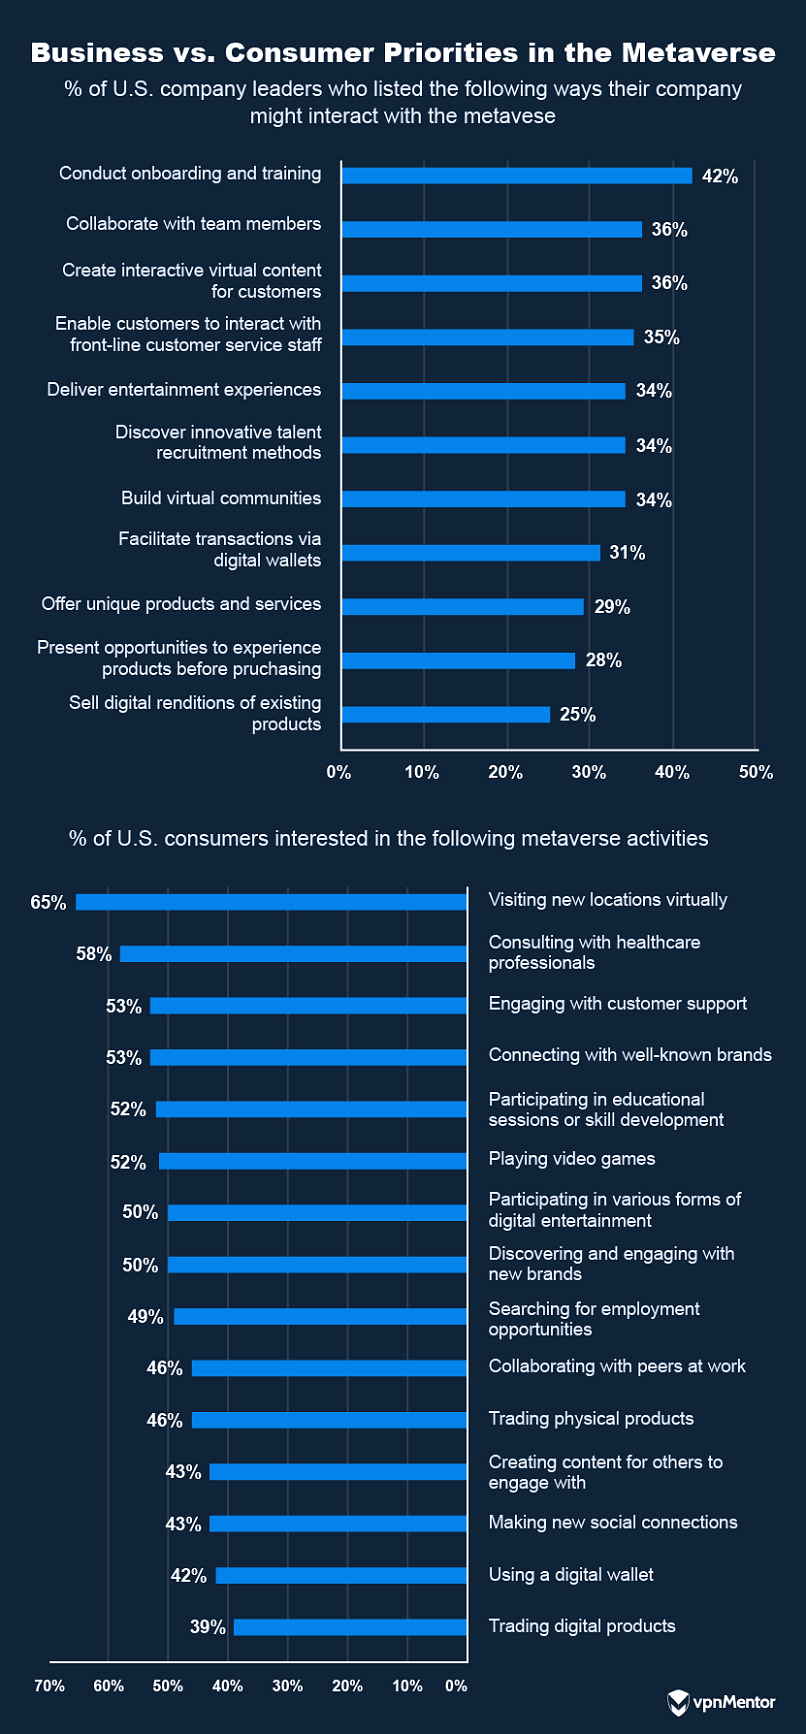 Stats about businesses intended uses of the metaverse vs those of consumers